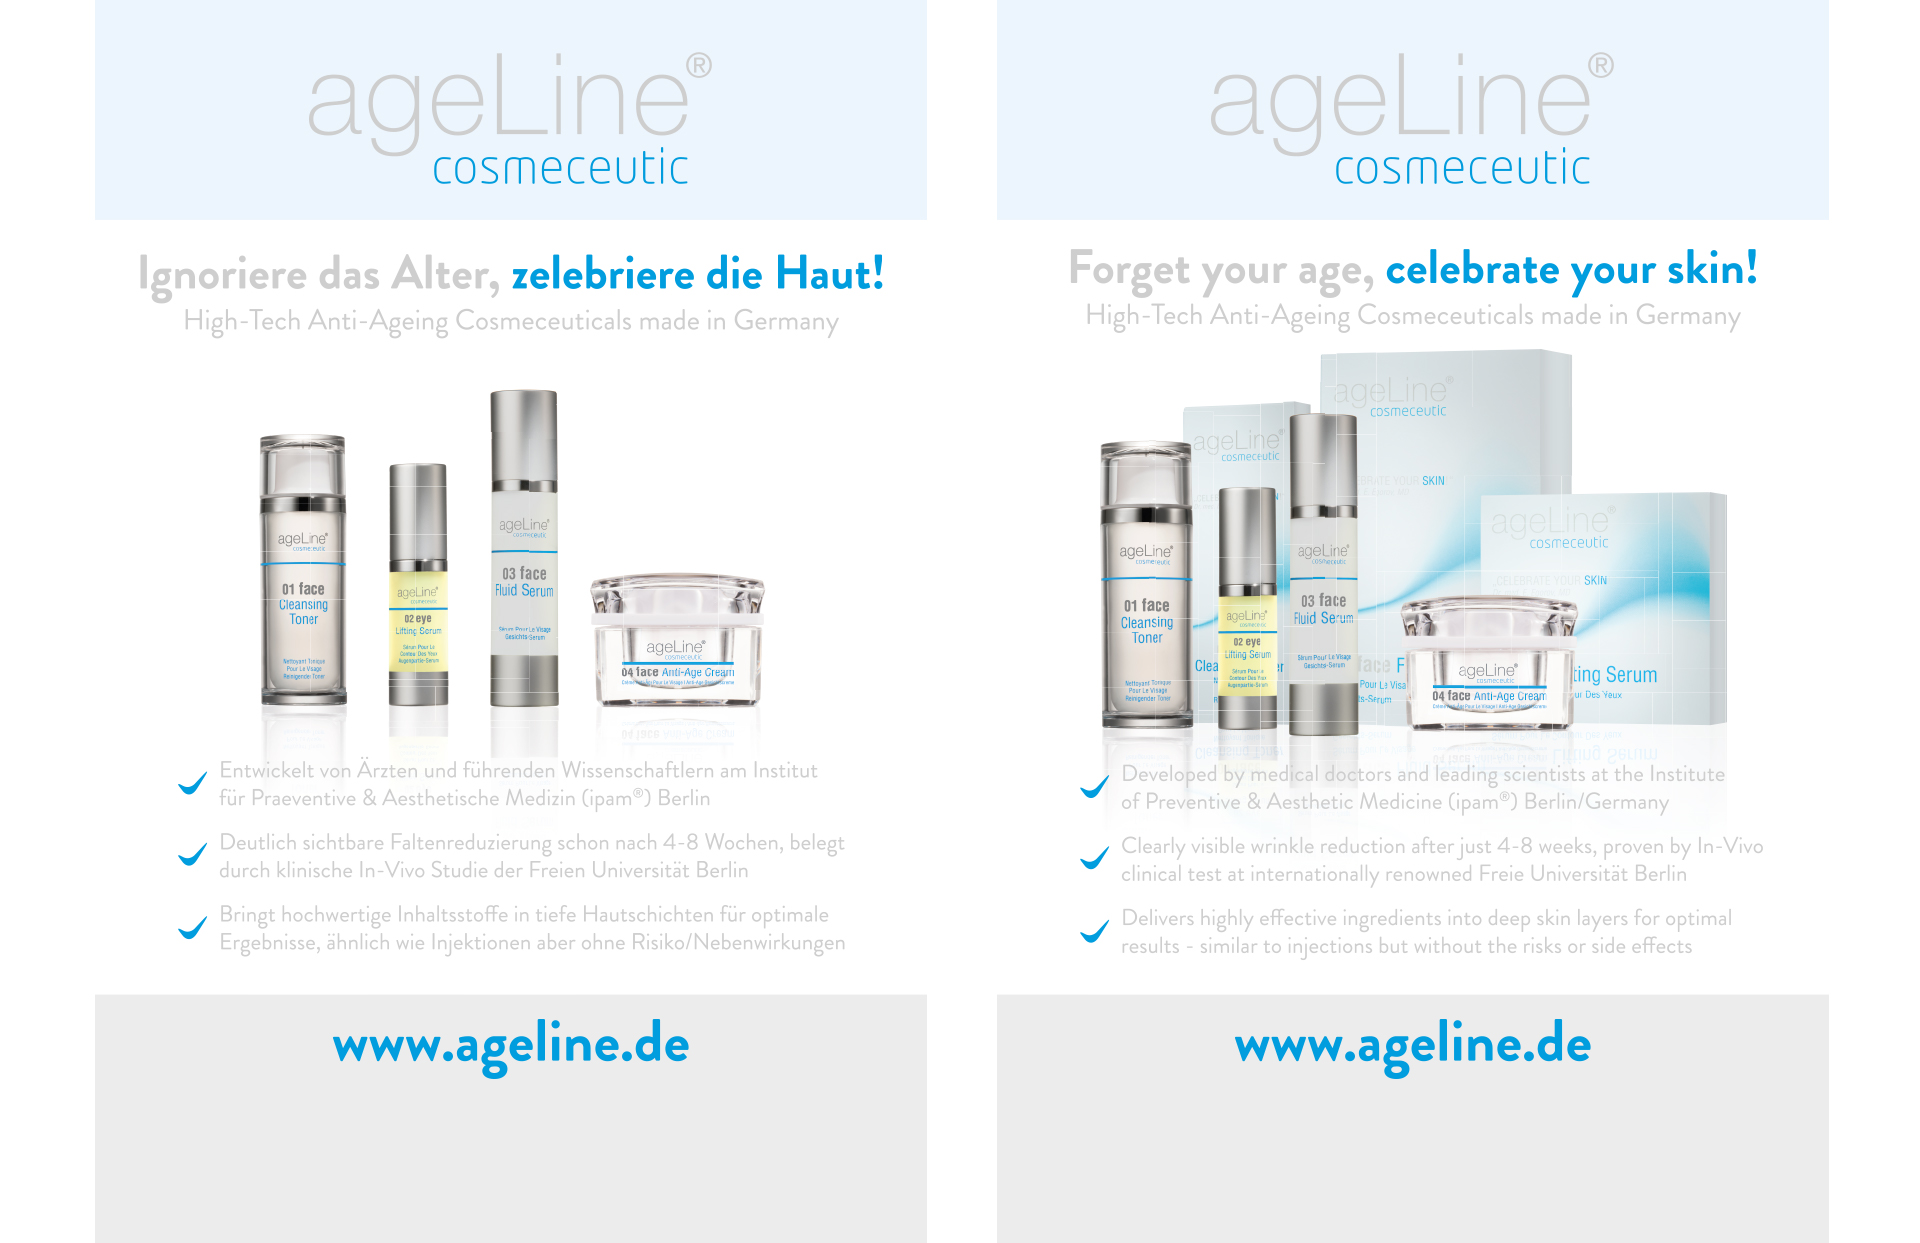 ageline Packaging Marketing Strategy beauty cosmetic layout skin age LAKE5 Consulting GmbH Hannover Germany